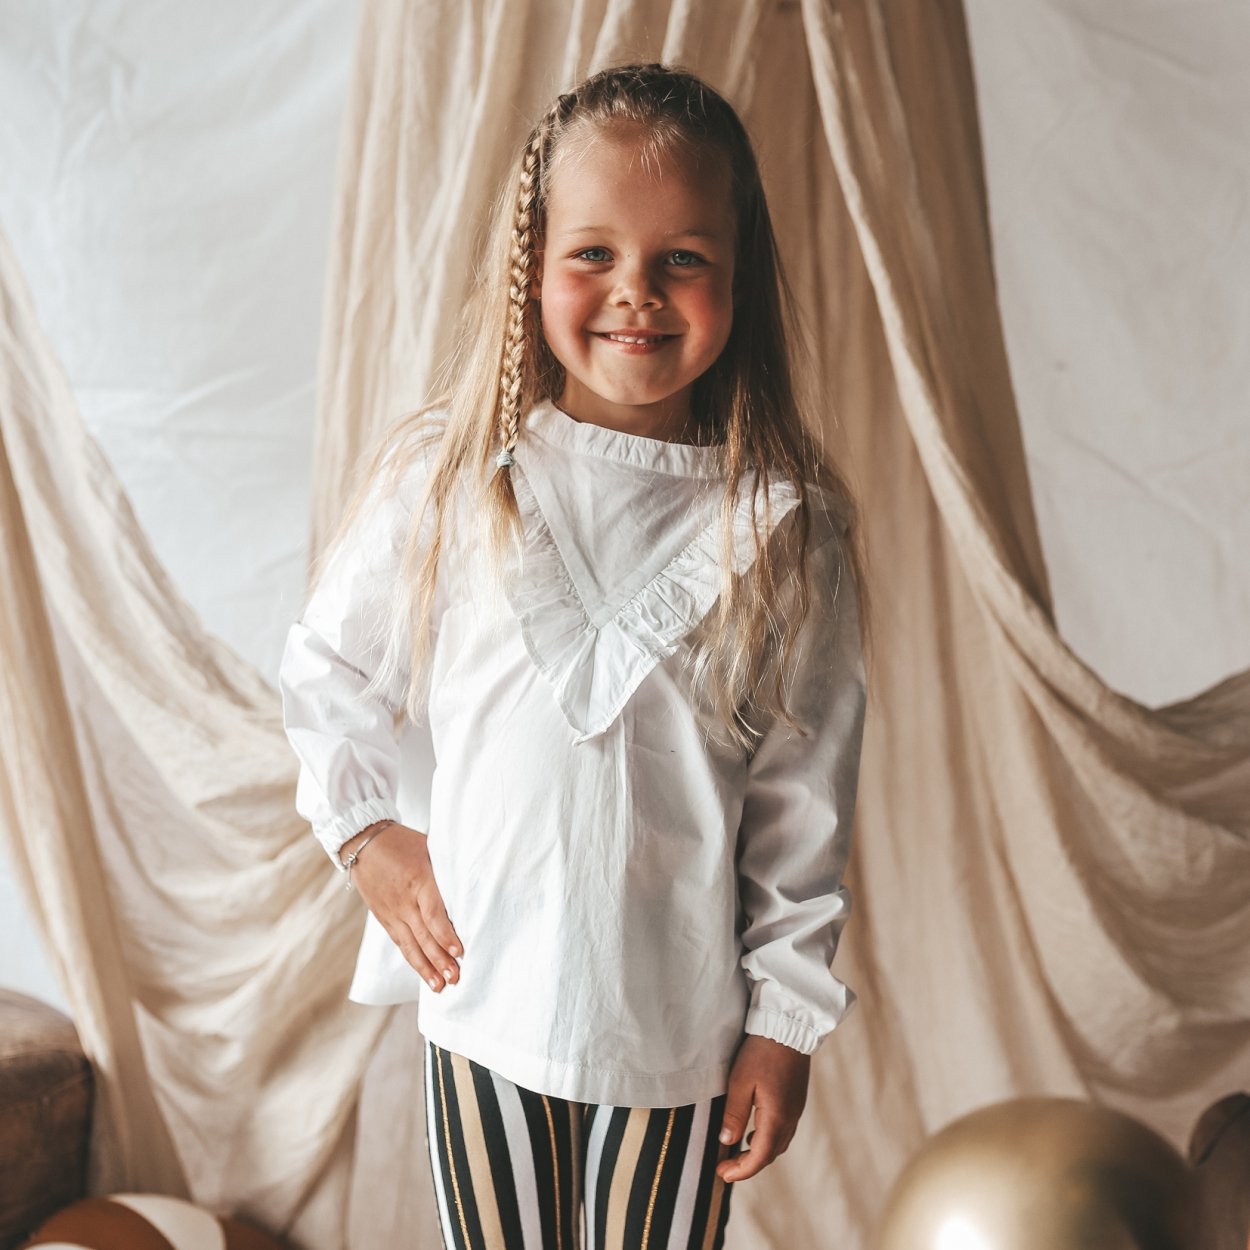 Meisjes Blouse Ruffle - Cynthia - off white van Your Wishes in de kleur Off-White in maat 134/140.